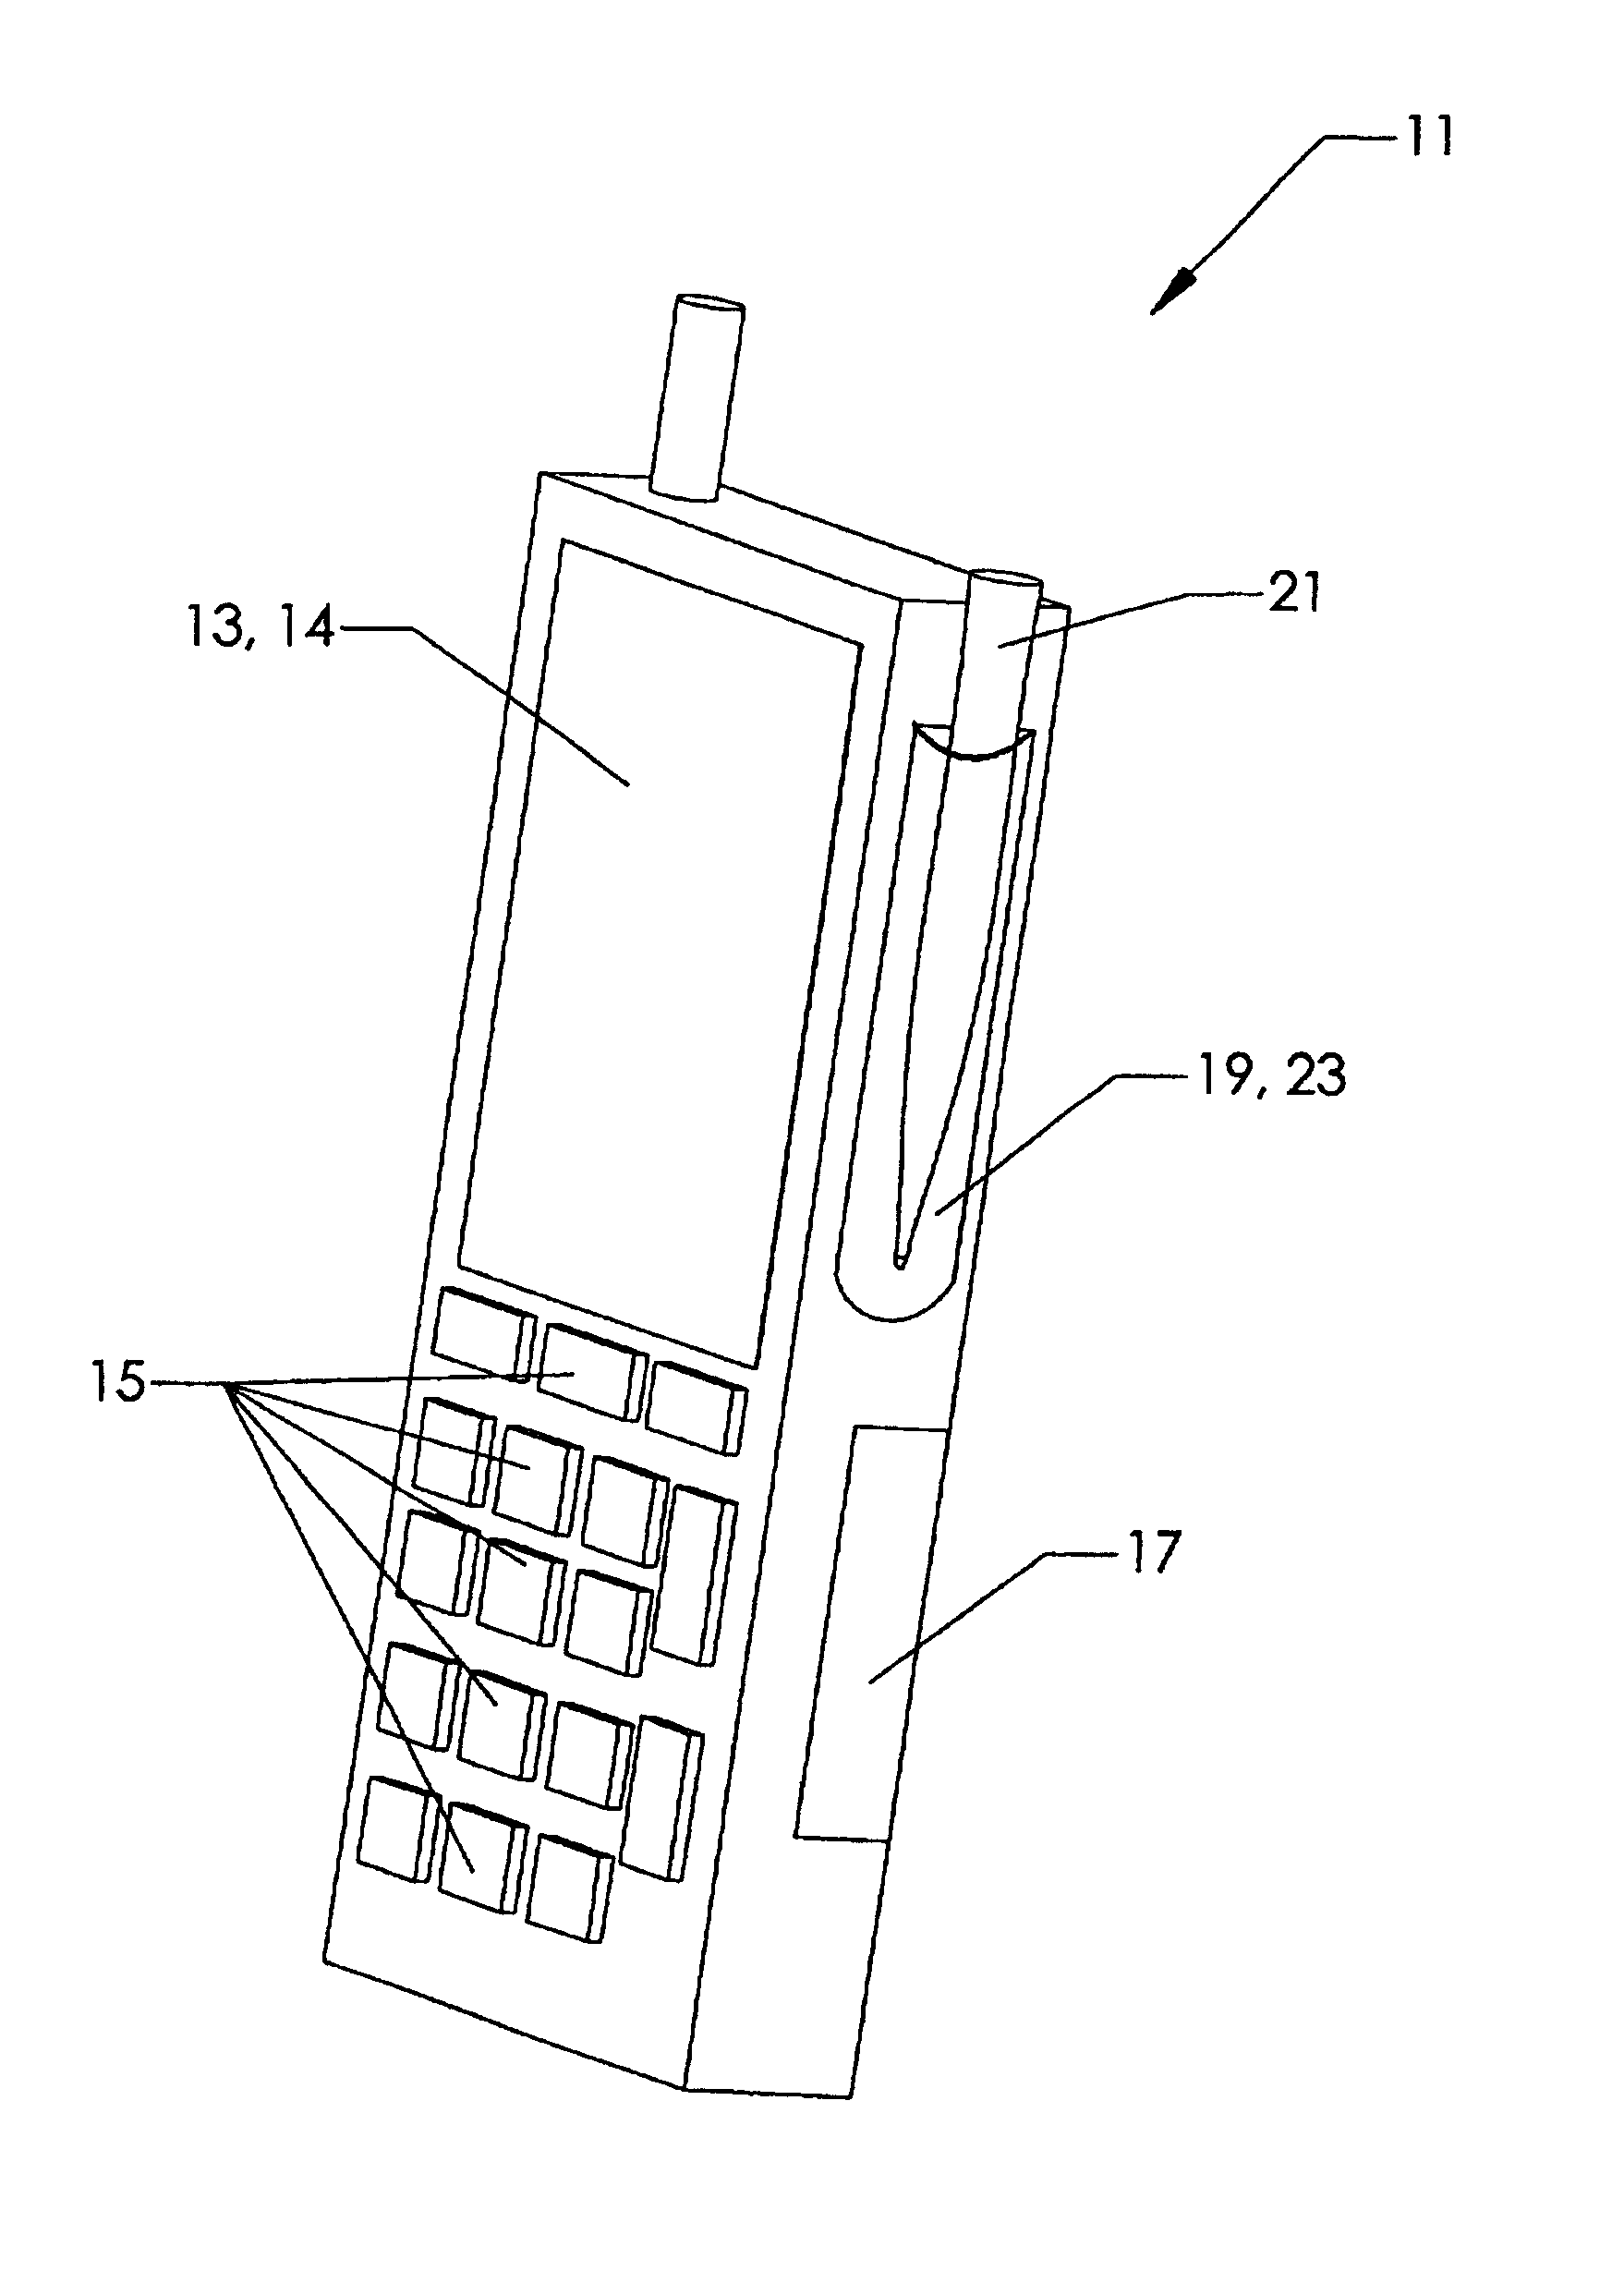 Automatic activation of touch sensitive screen in a hand held computing device